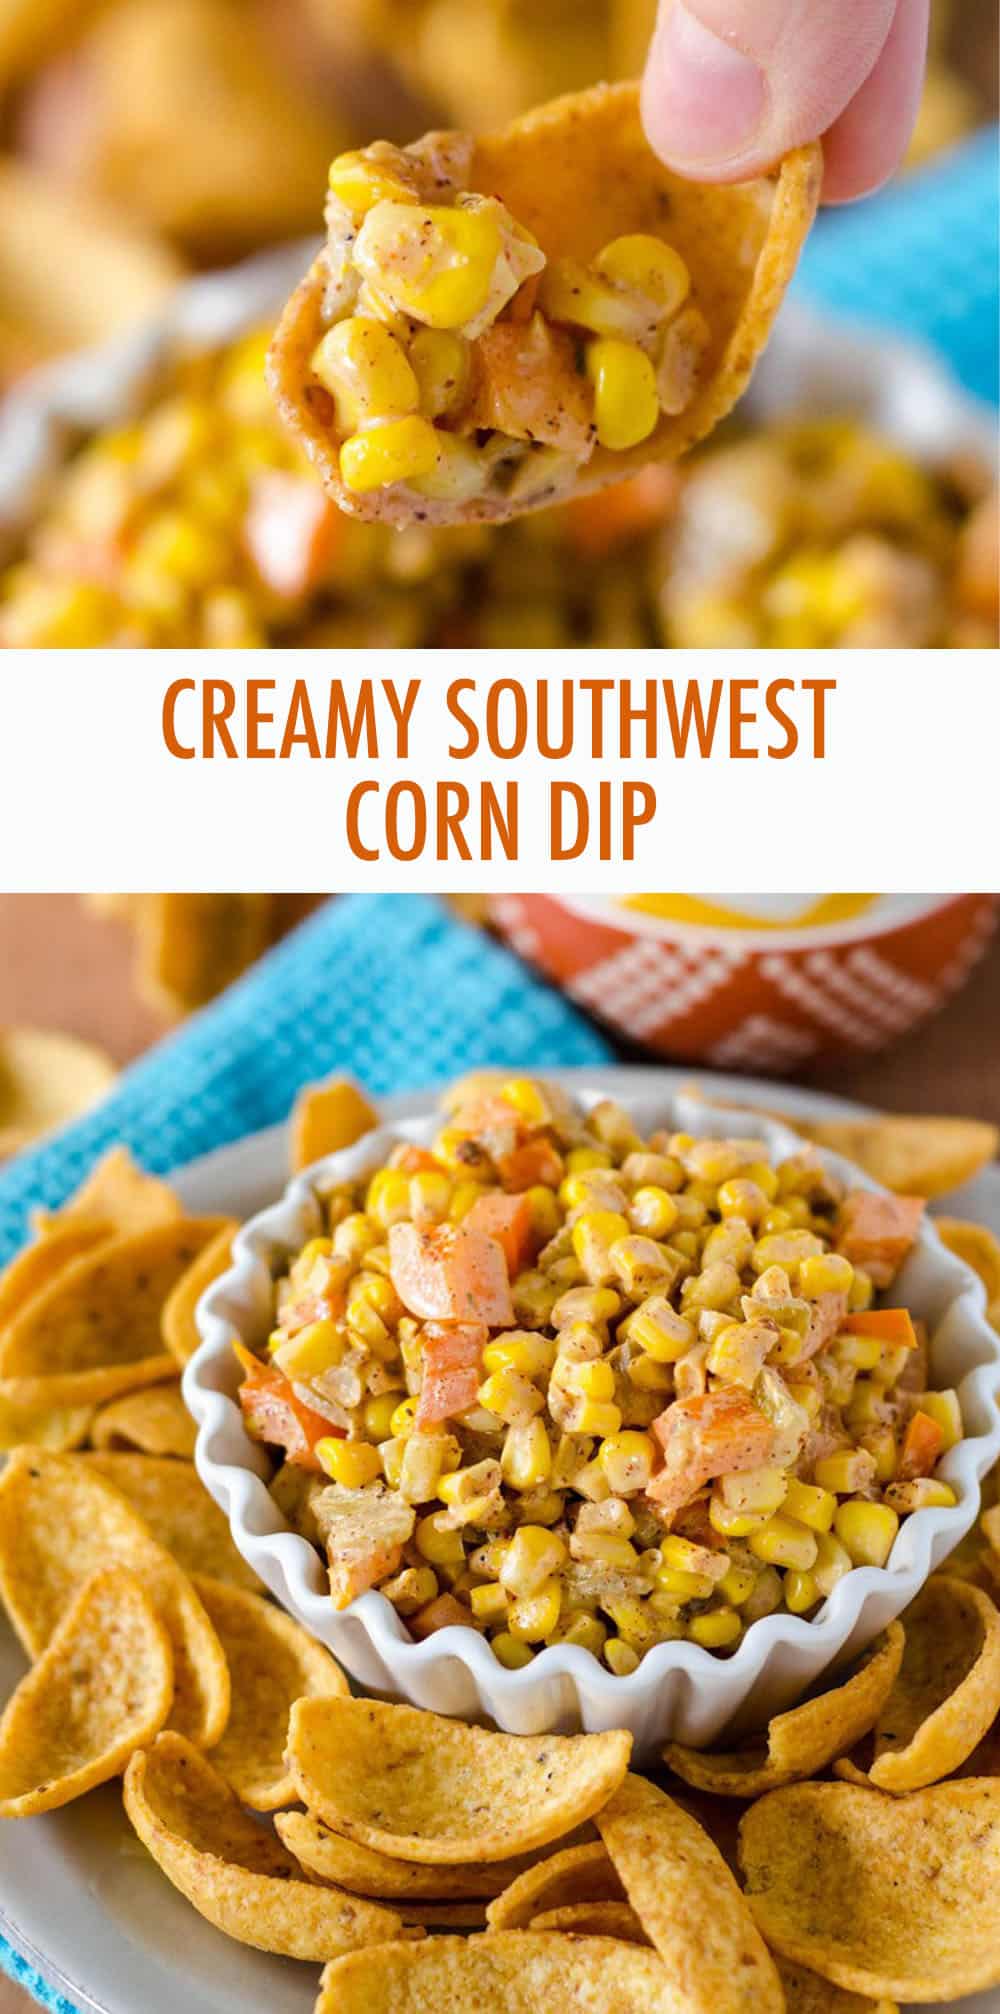 Creamy corn dip, loaded with crisp chiles and bell peppers and spiced with homemade taco seasoning. Great with corn or tortilla chips! via @frshaprilflours